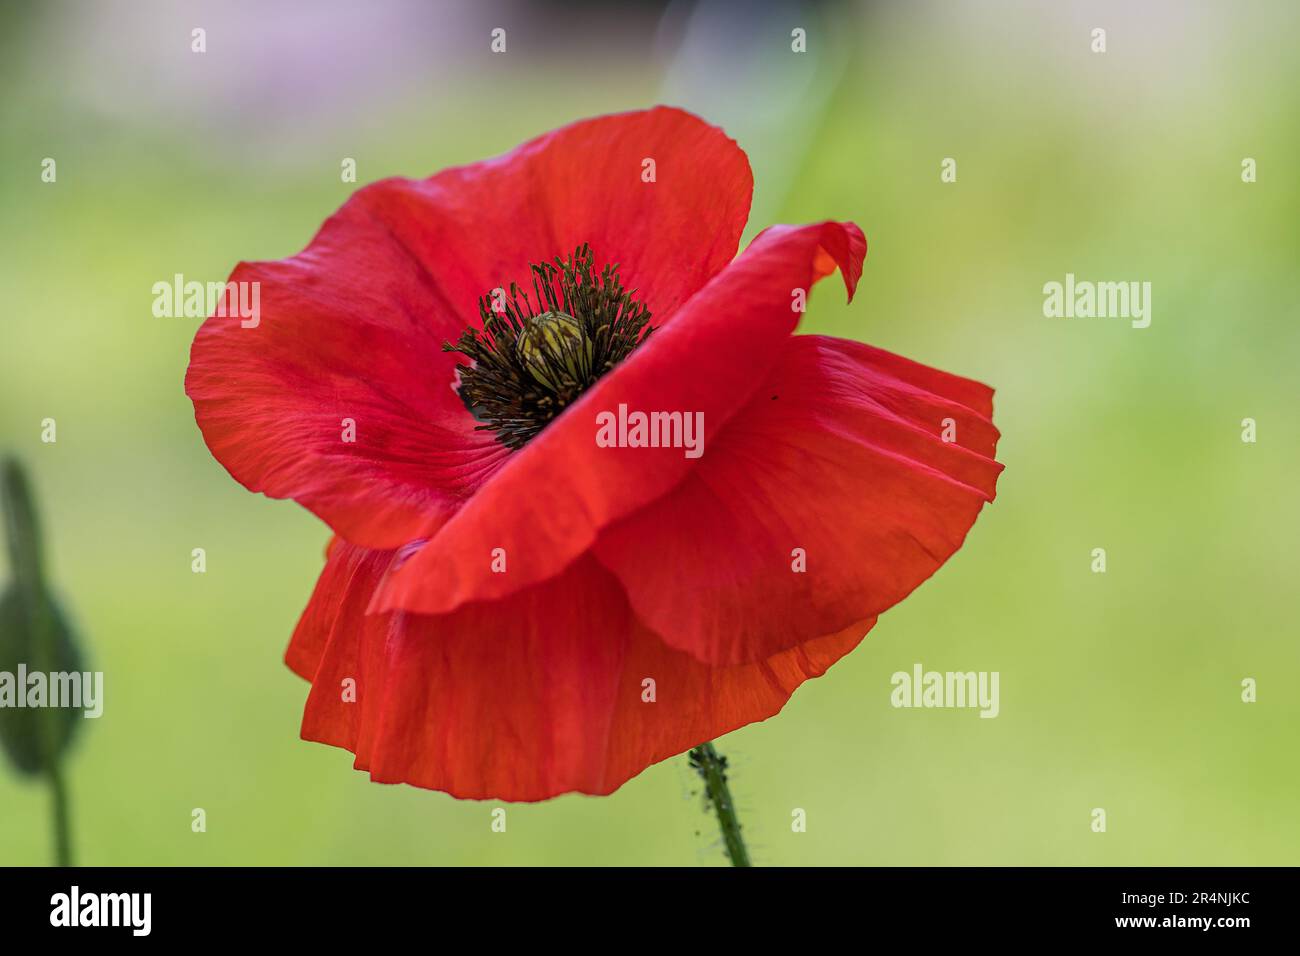 Red Poppy: Nature's artistry at its finest. Stock Photo